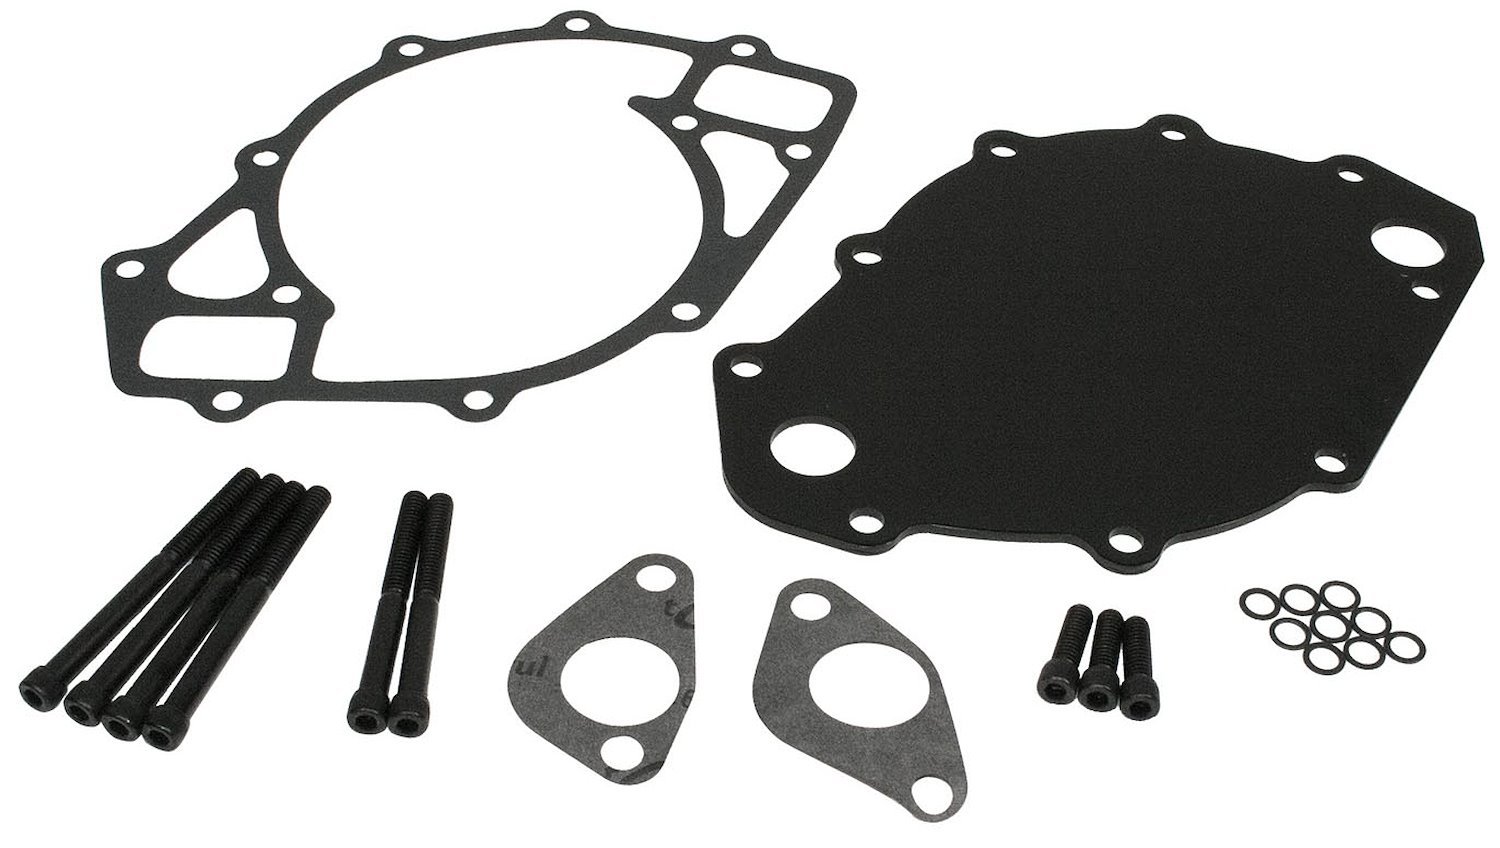 Replacement Water Pump Backplate for Die Cast 4446017 [Big Block Ford 429/460] Black